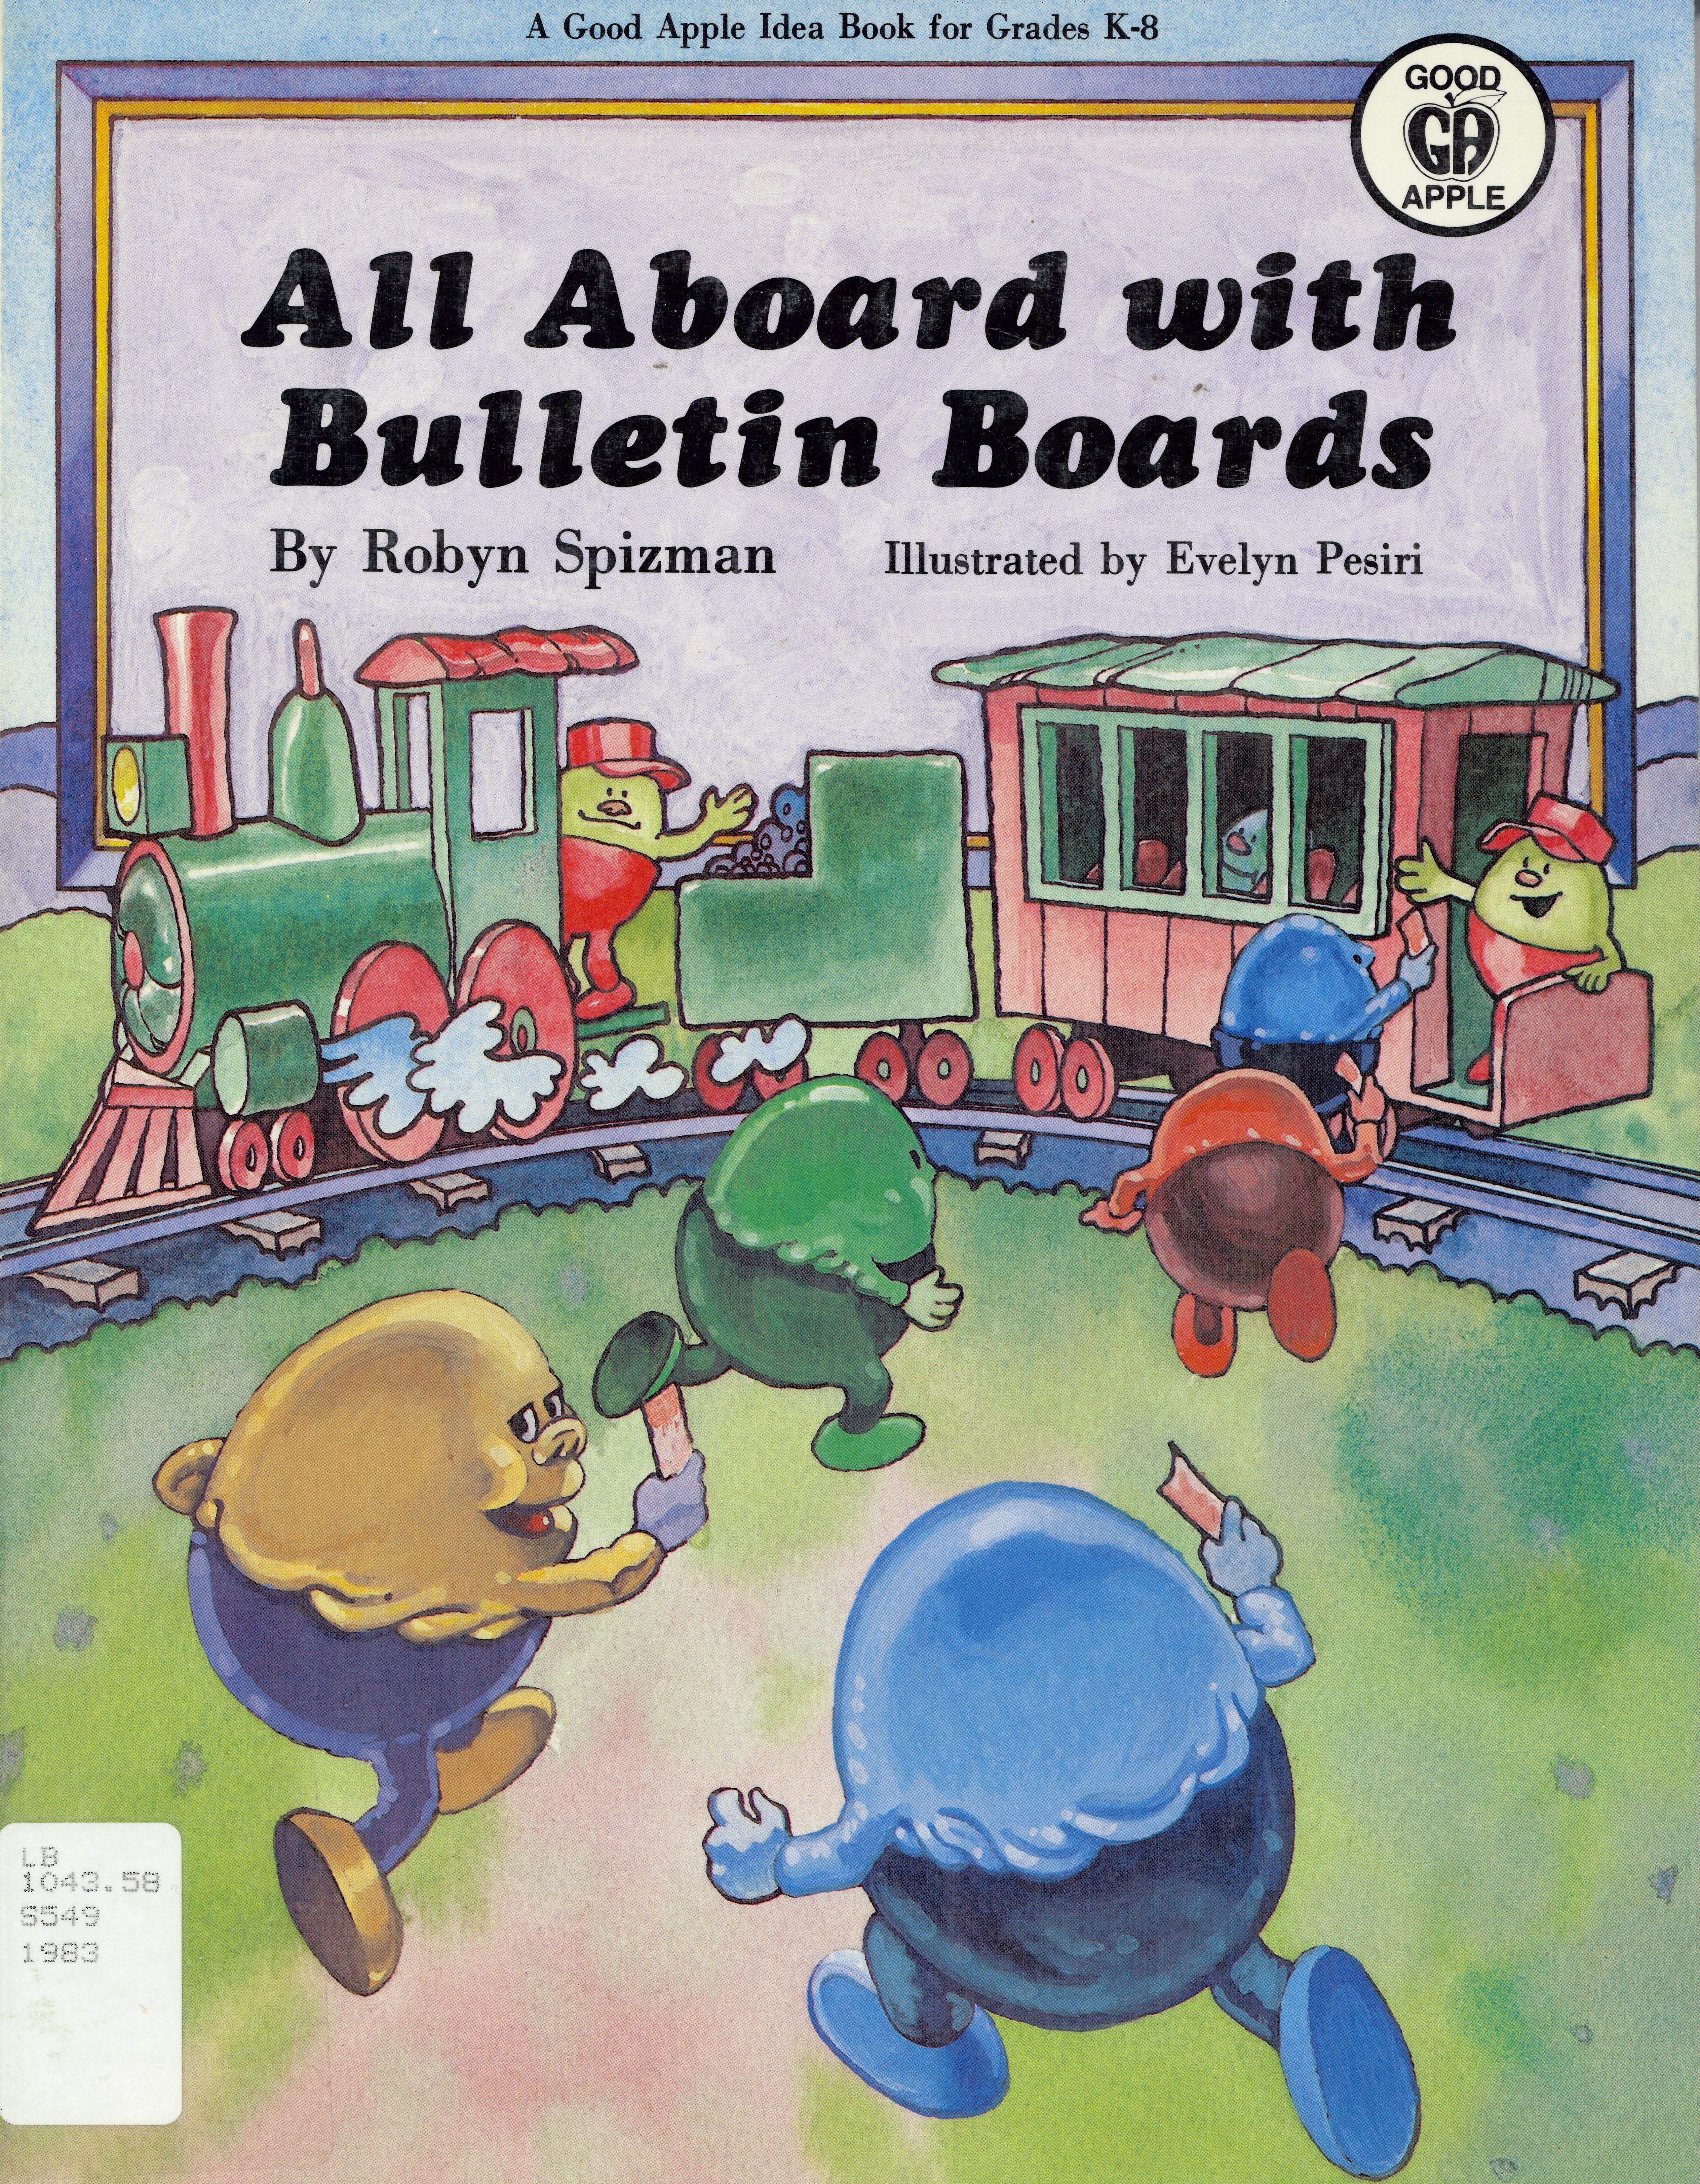 All aboard with bulletin boards